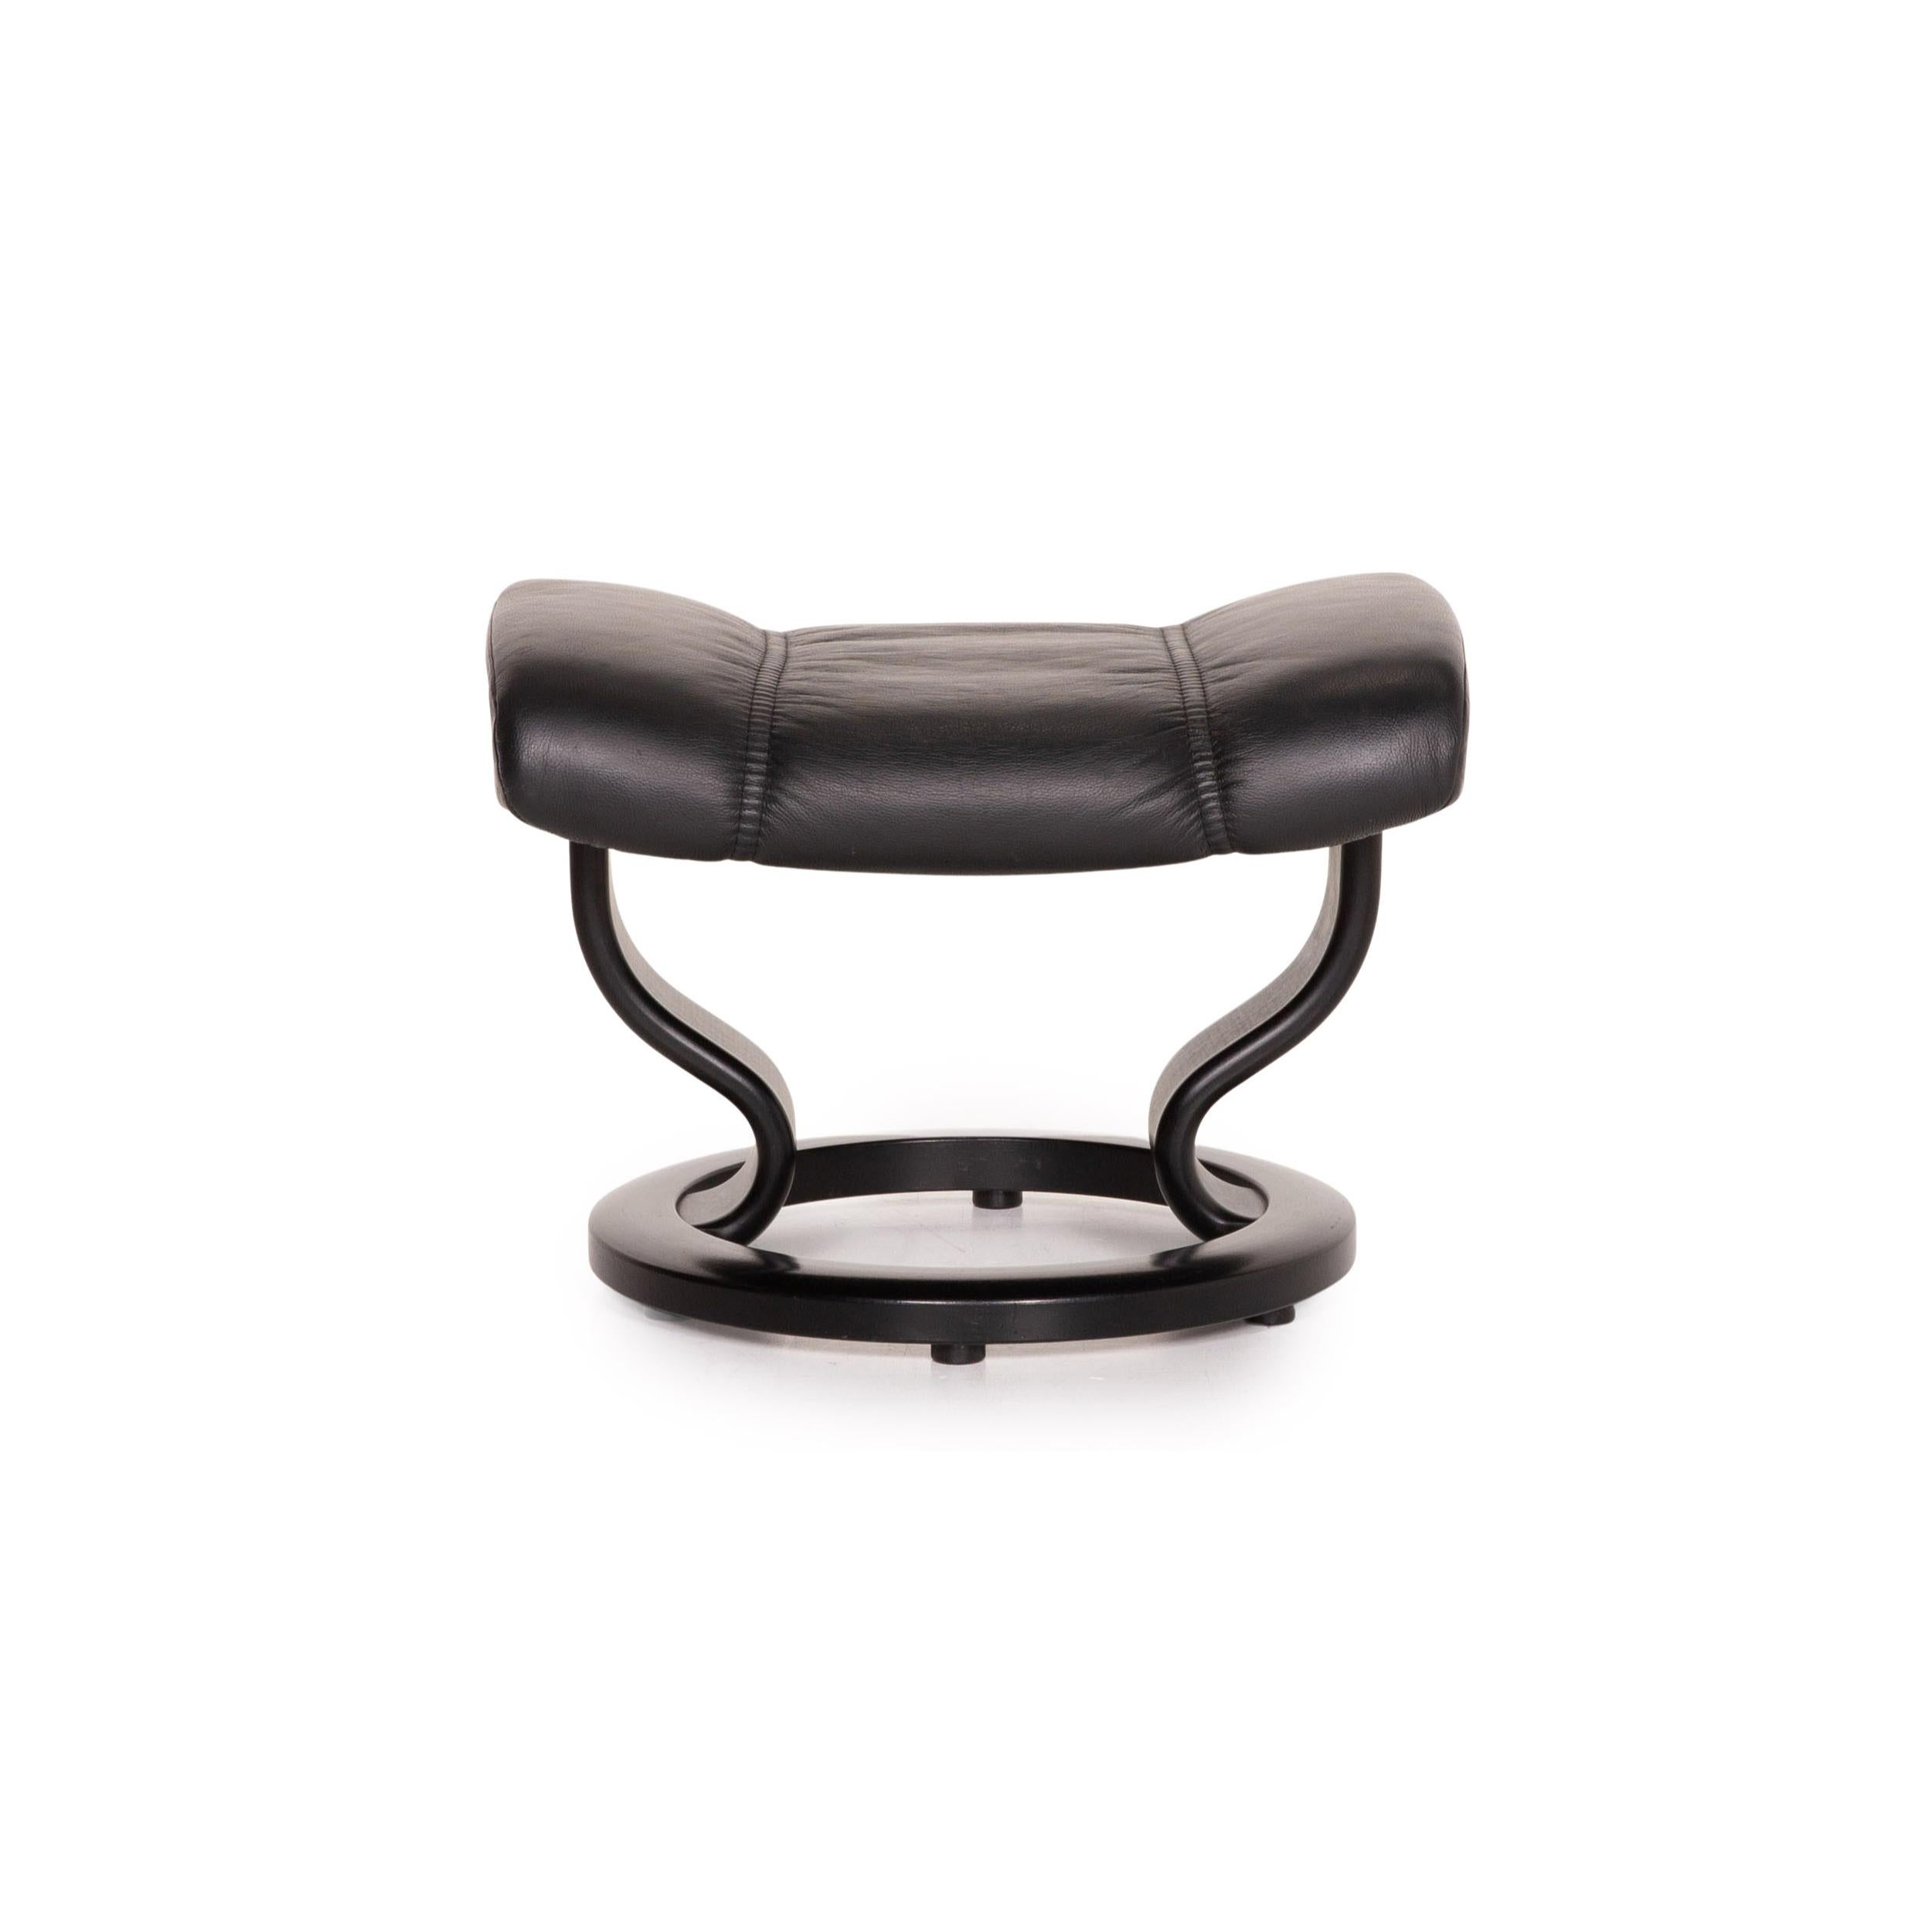 Stressless Consul Leather Armchair Incl. Stool Black Function Relaxation For Sale 9